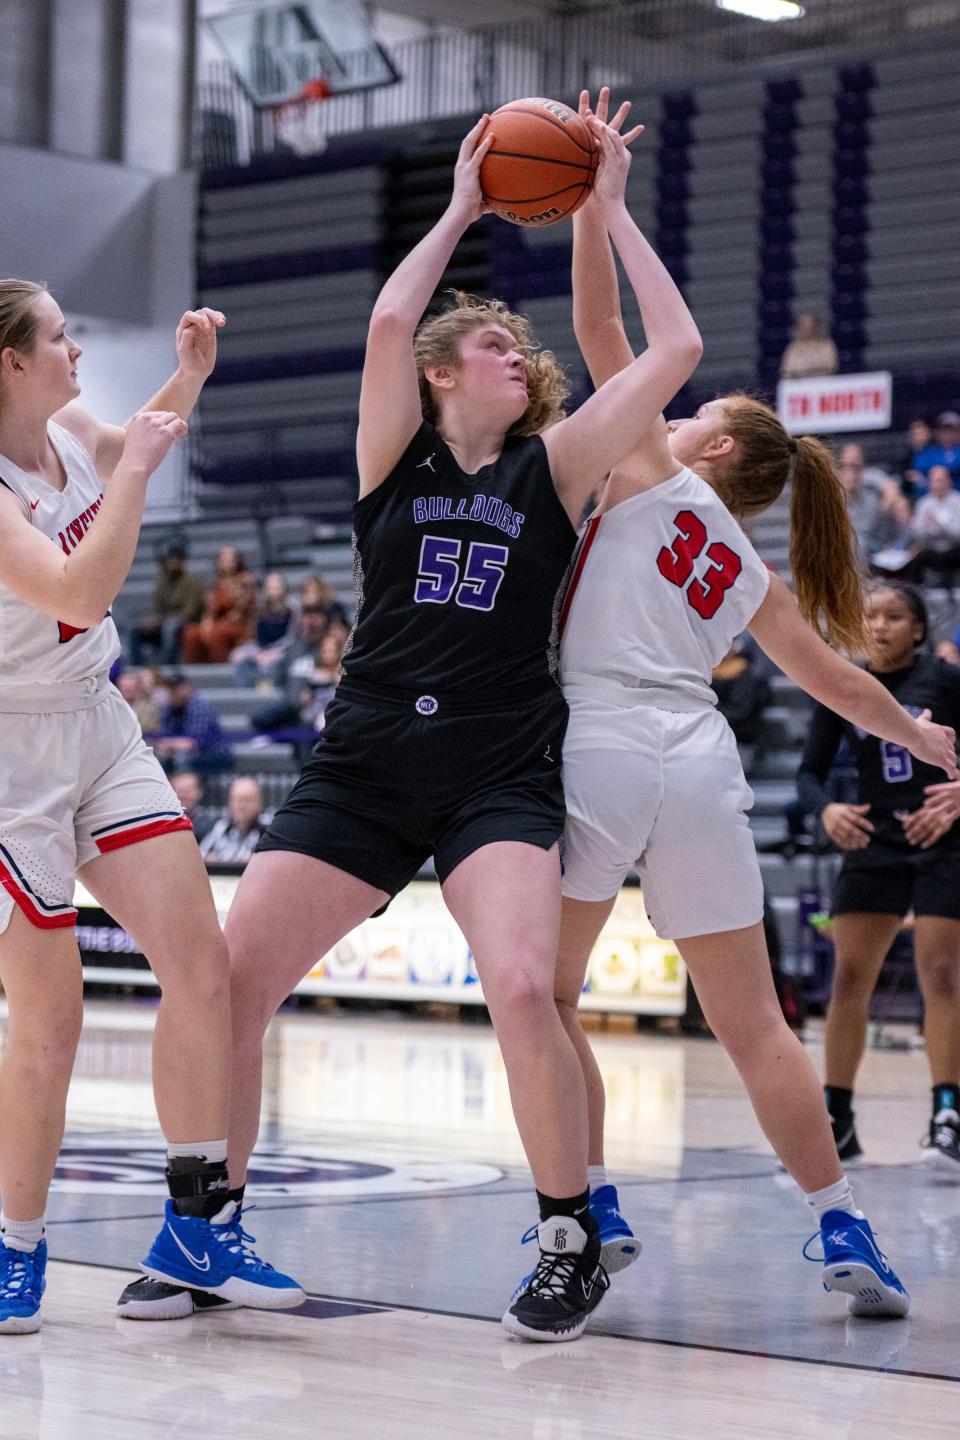 Brownsburg High School freshman Avery Gordon (55) attempts to get a shot away while being defended by Plainfield High School senior Jozee Rhodes (33) during the first half of an IHSAA Girls’ Sectional semi-final basketball game, Saturday, Feb. 5, 2022, at Brownsburg High School.